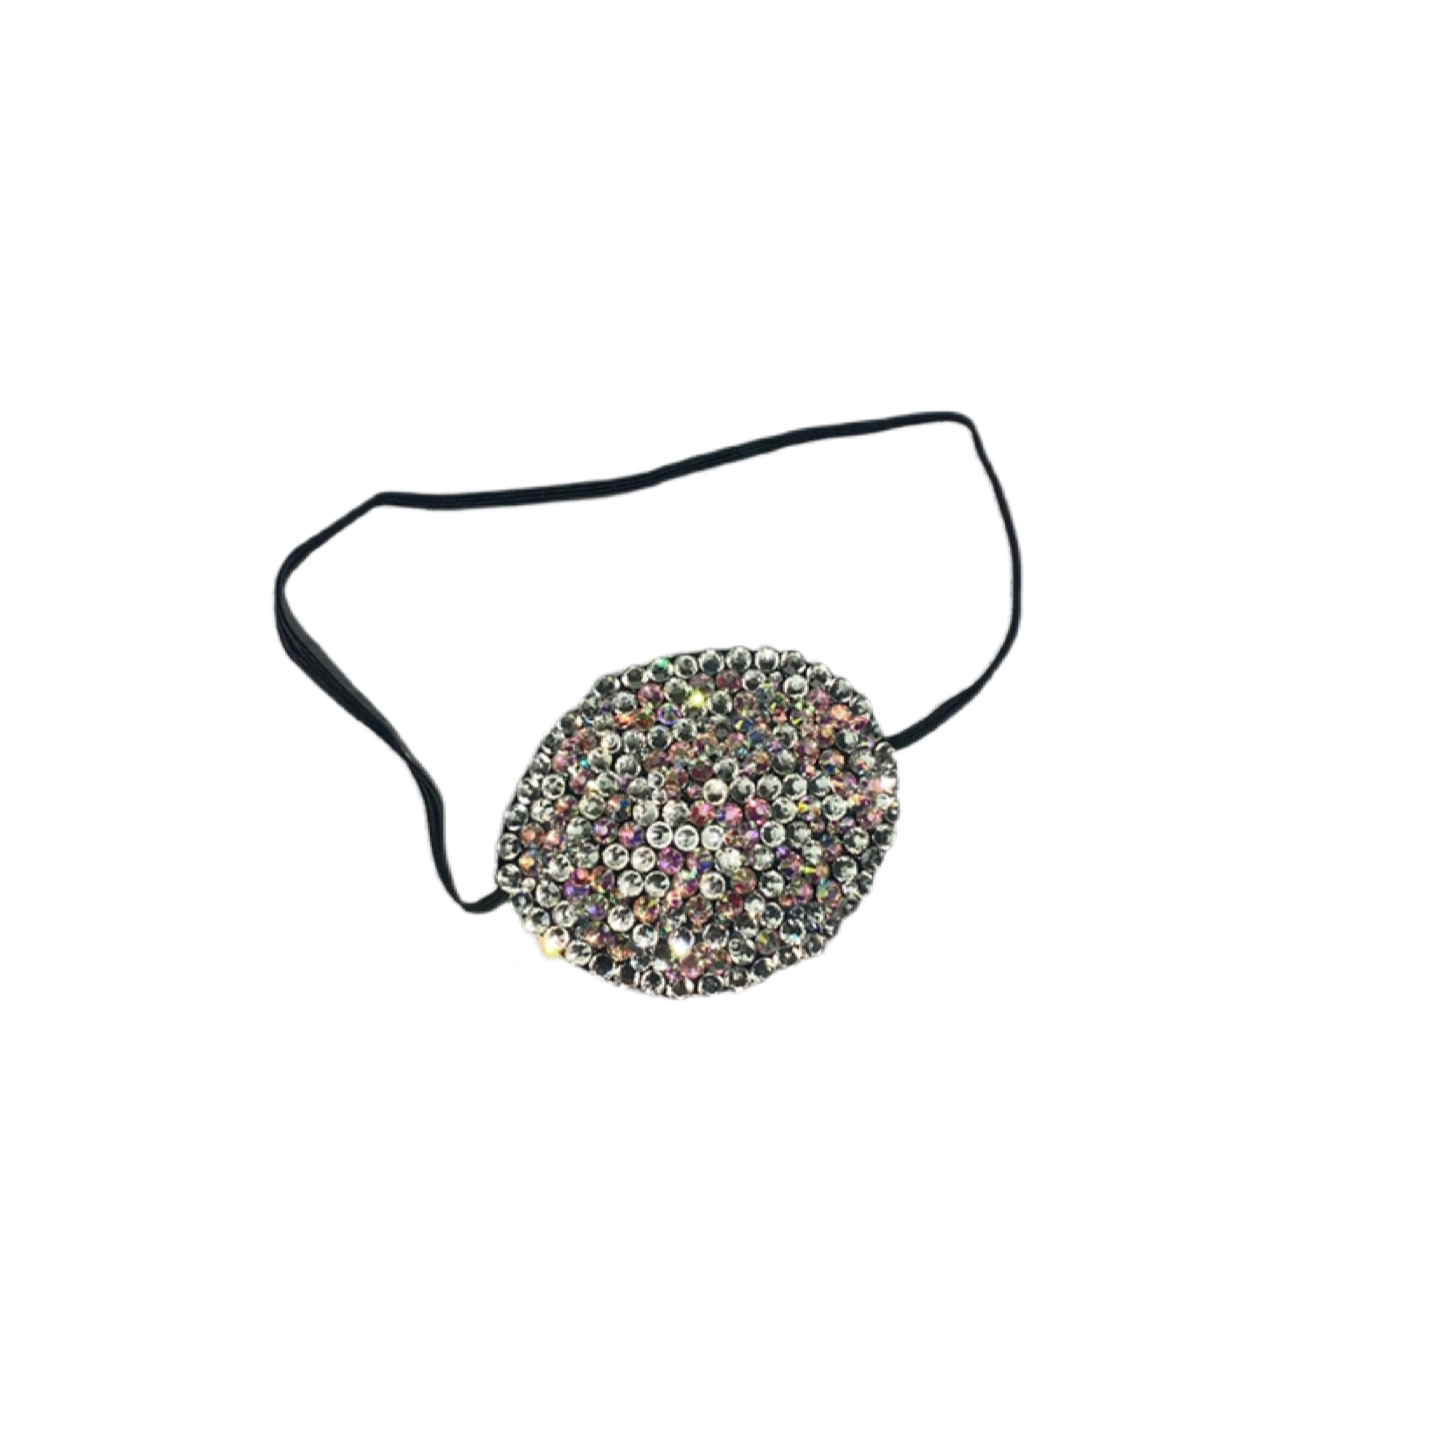 Luxe Black Eye Patch Bedazzled In Crystal & Crystal AB